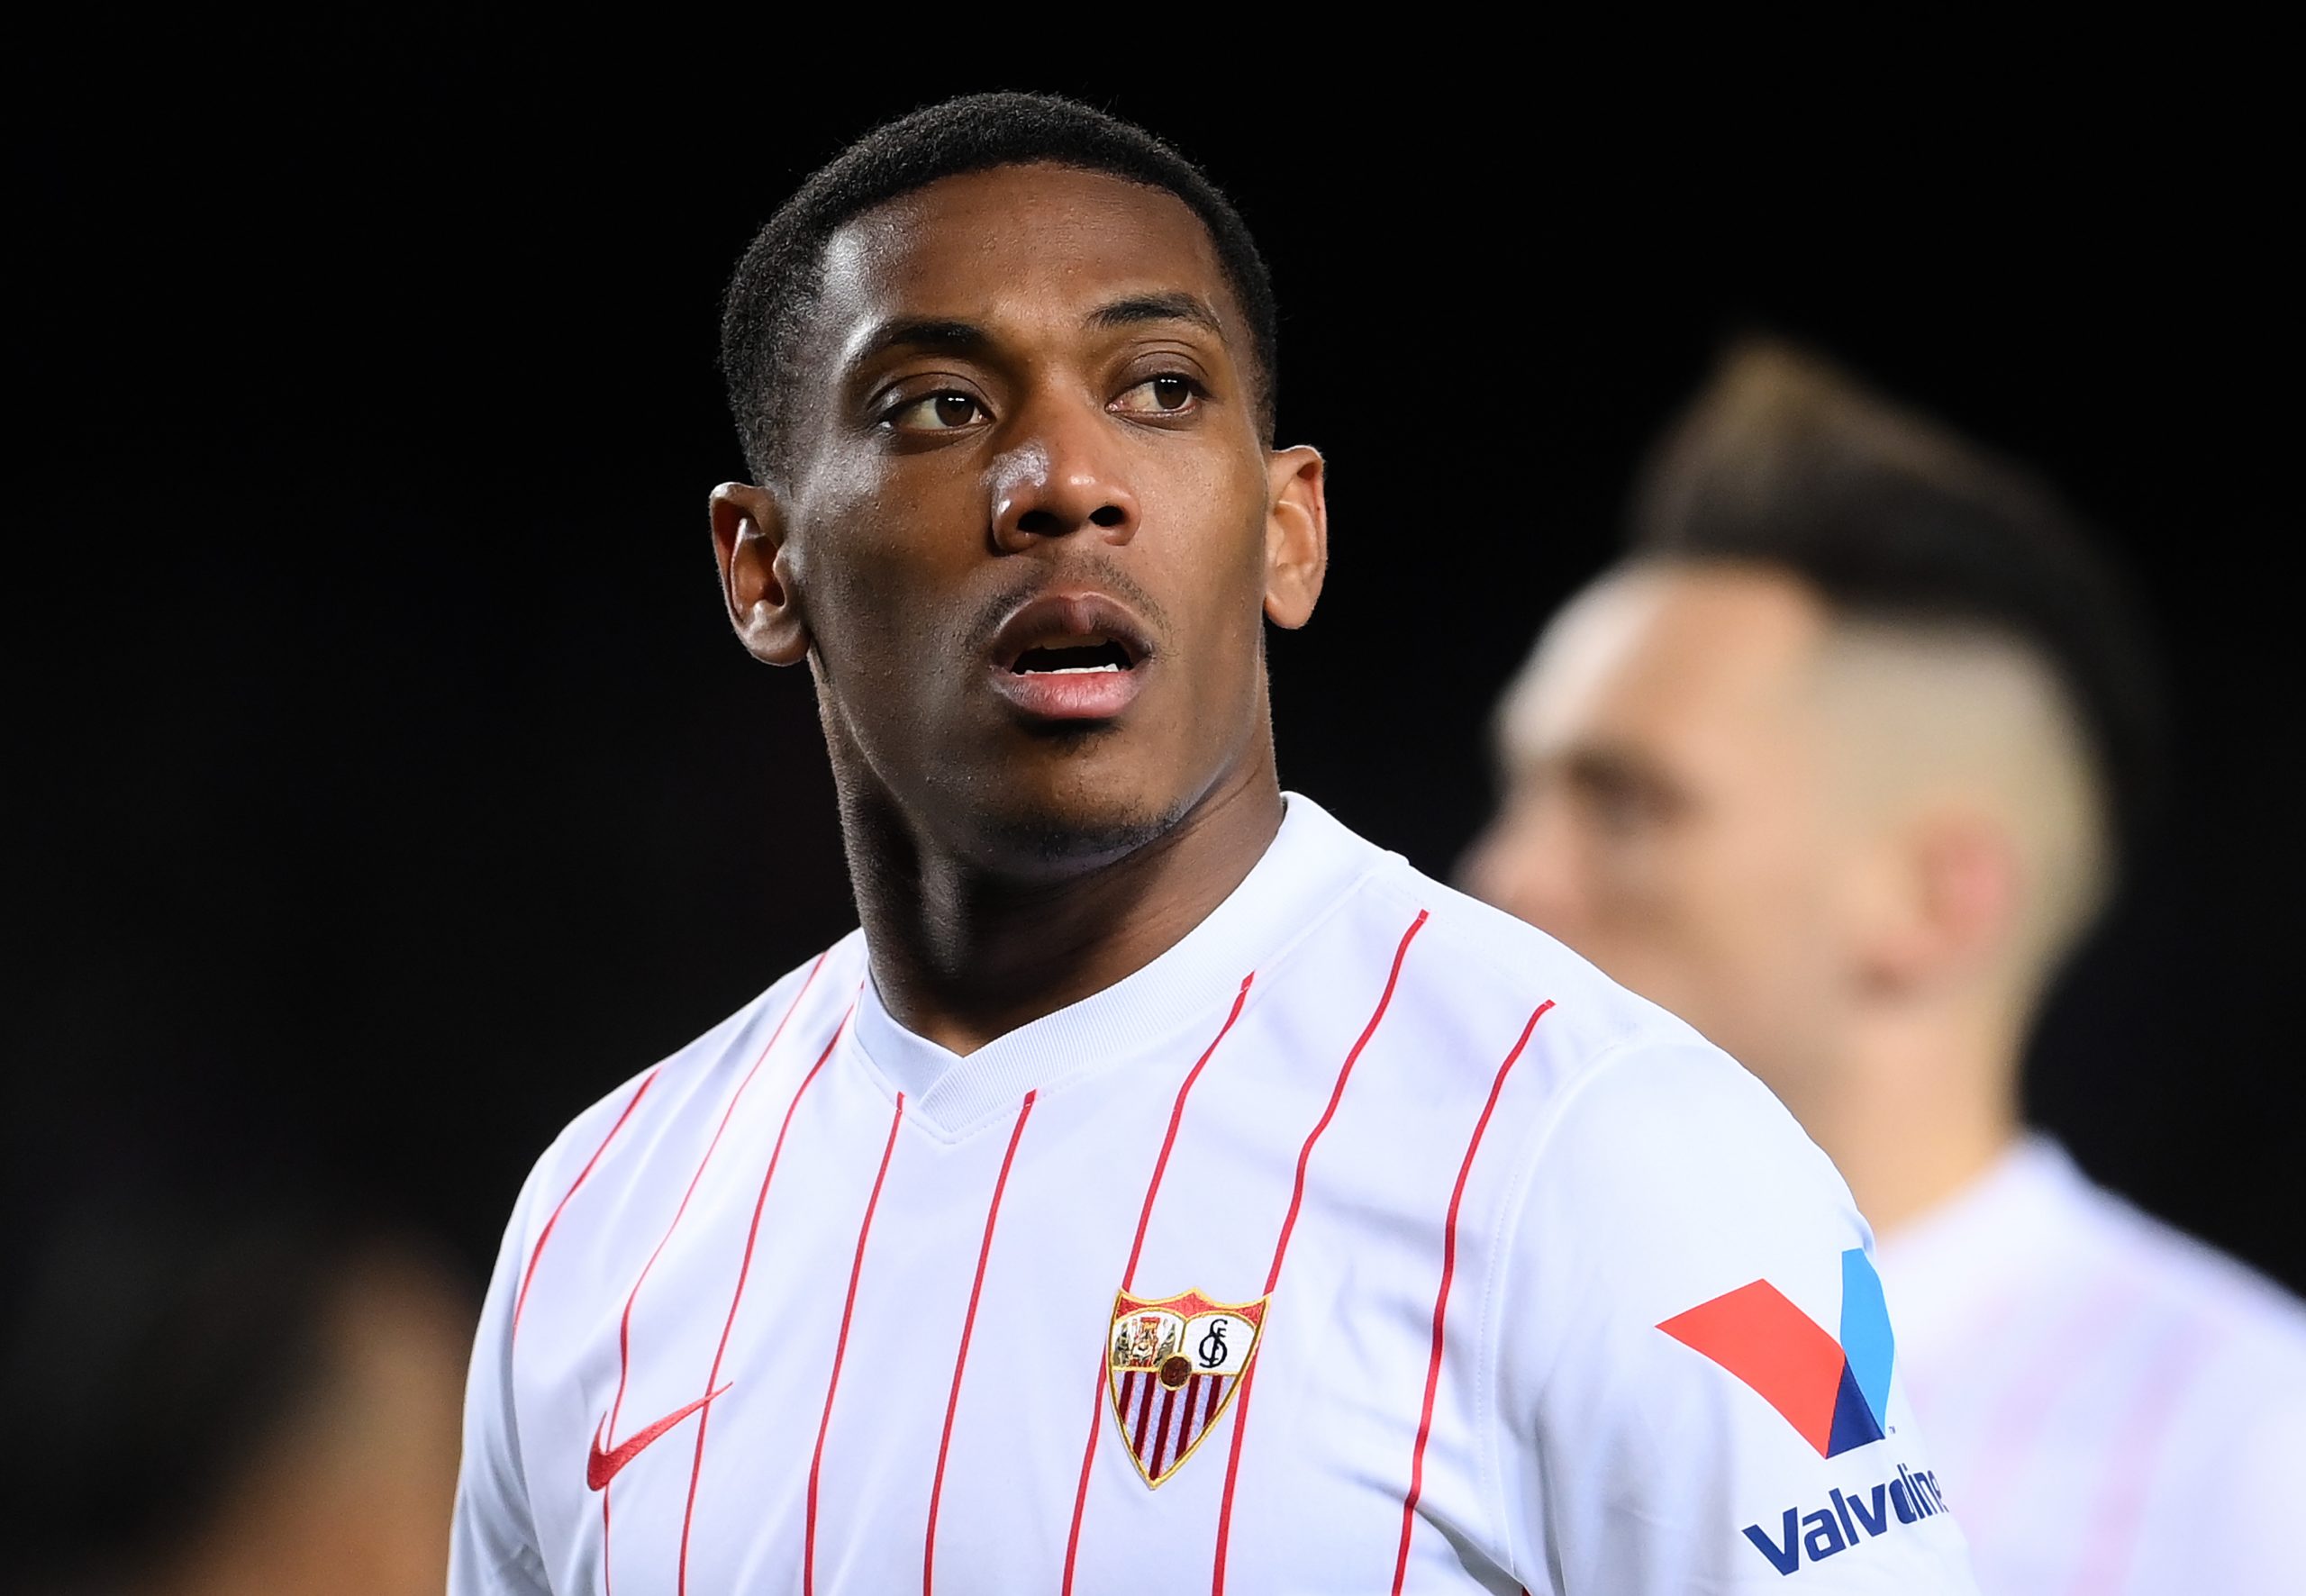 Anthony Martial to return to Manchester United after his loan spell at  Sevilla